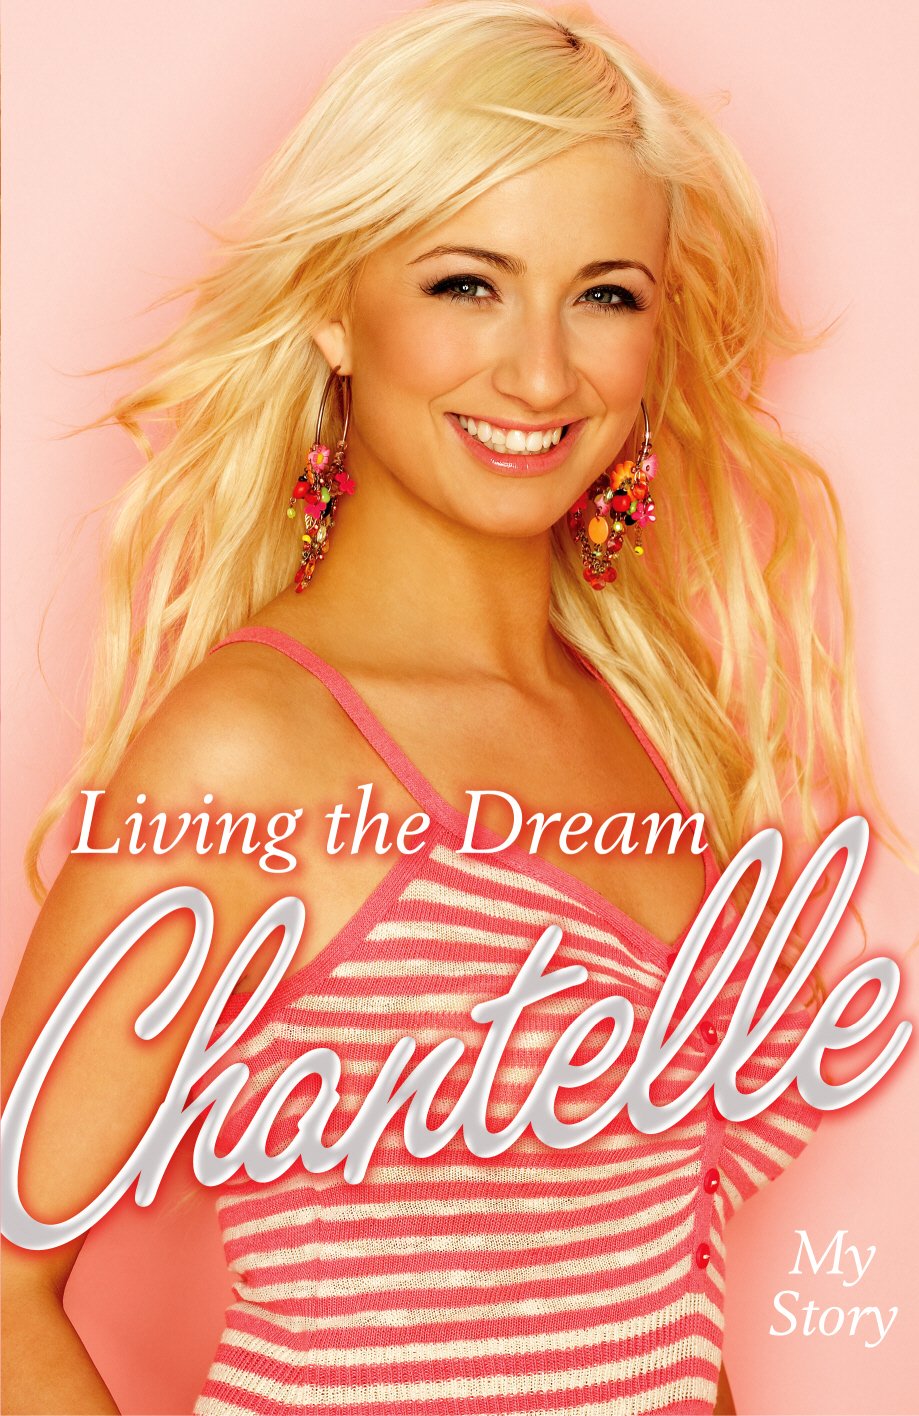 chantelle houghton living the dream autobiography